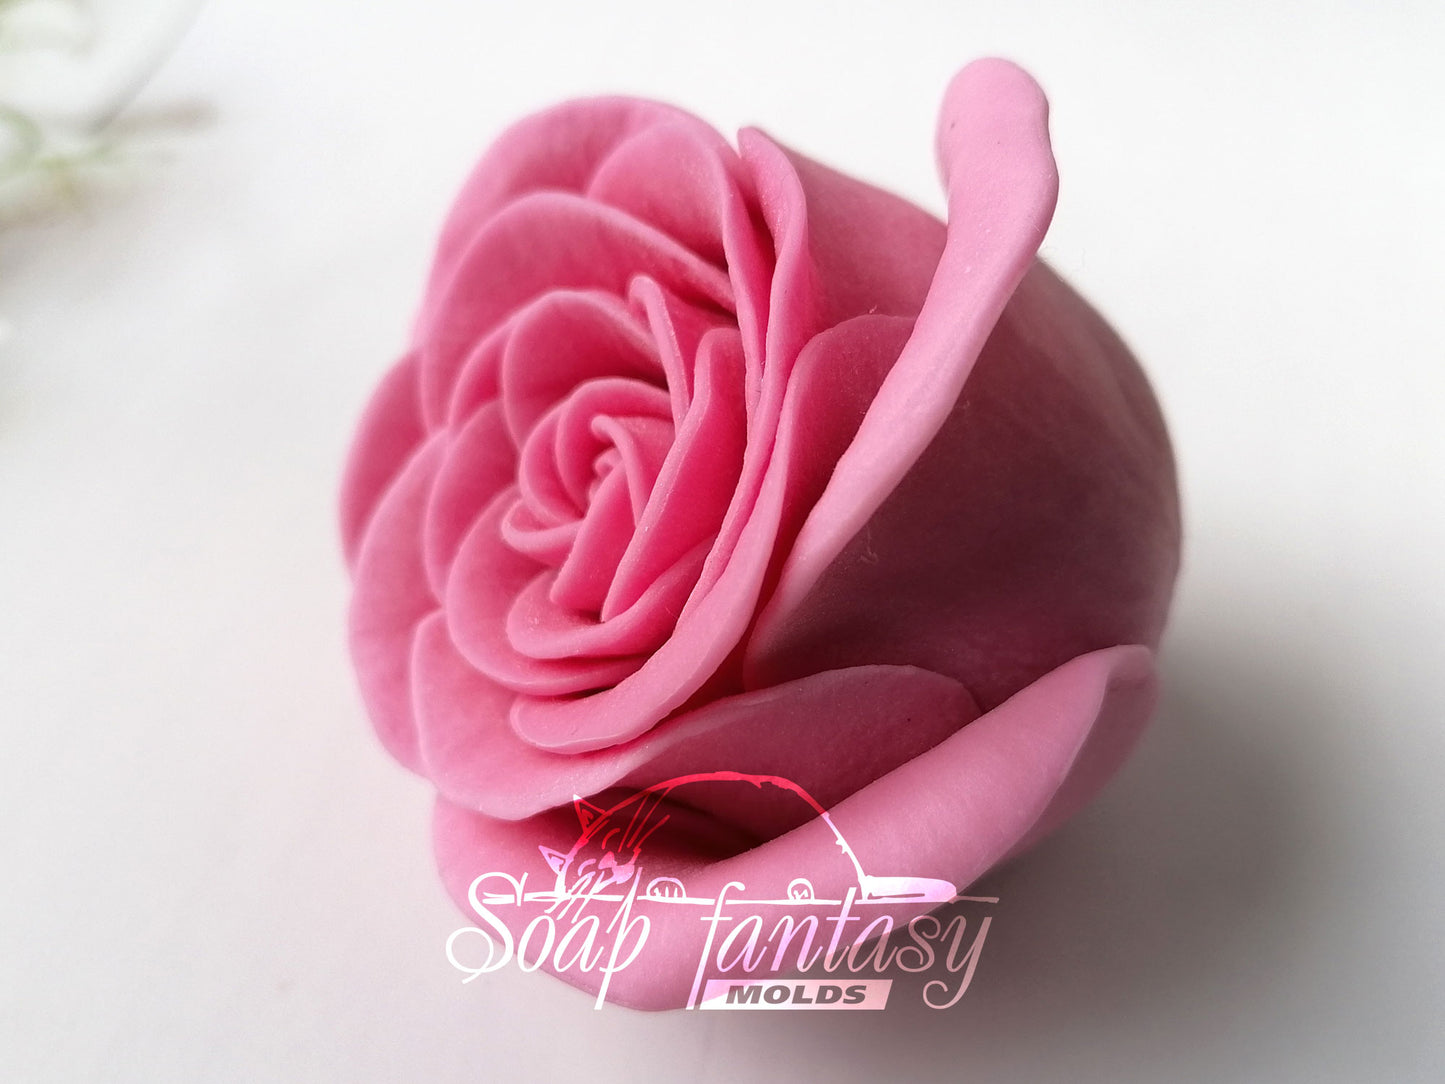 Porcelain rose #3 silicone mold for soap making